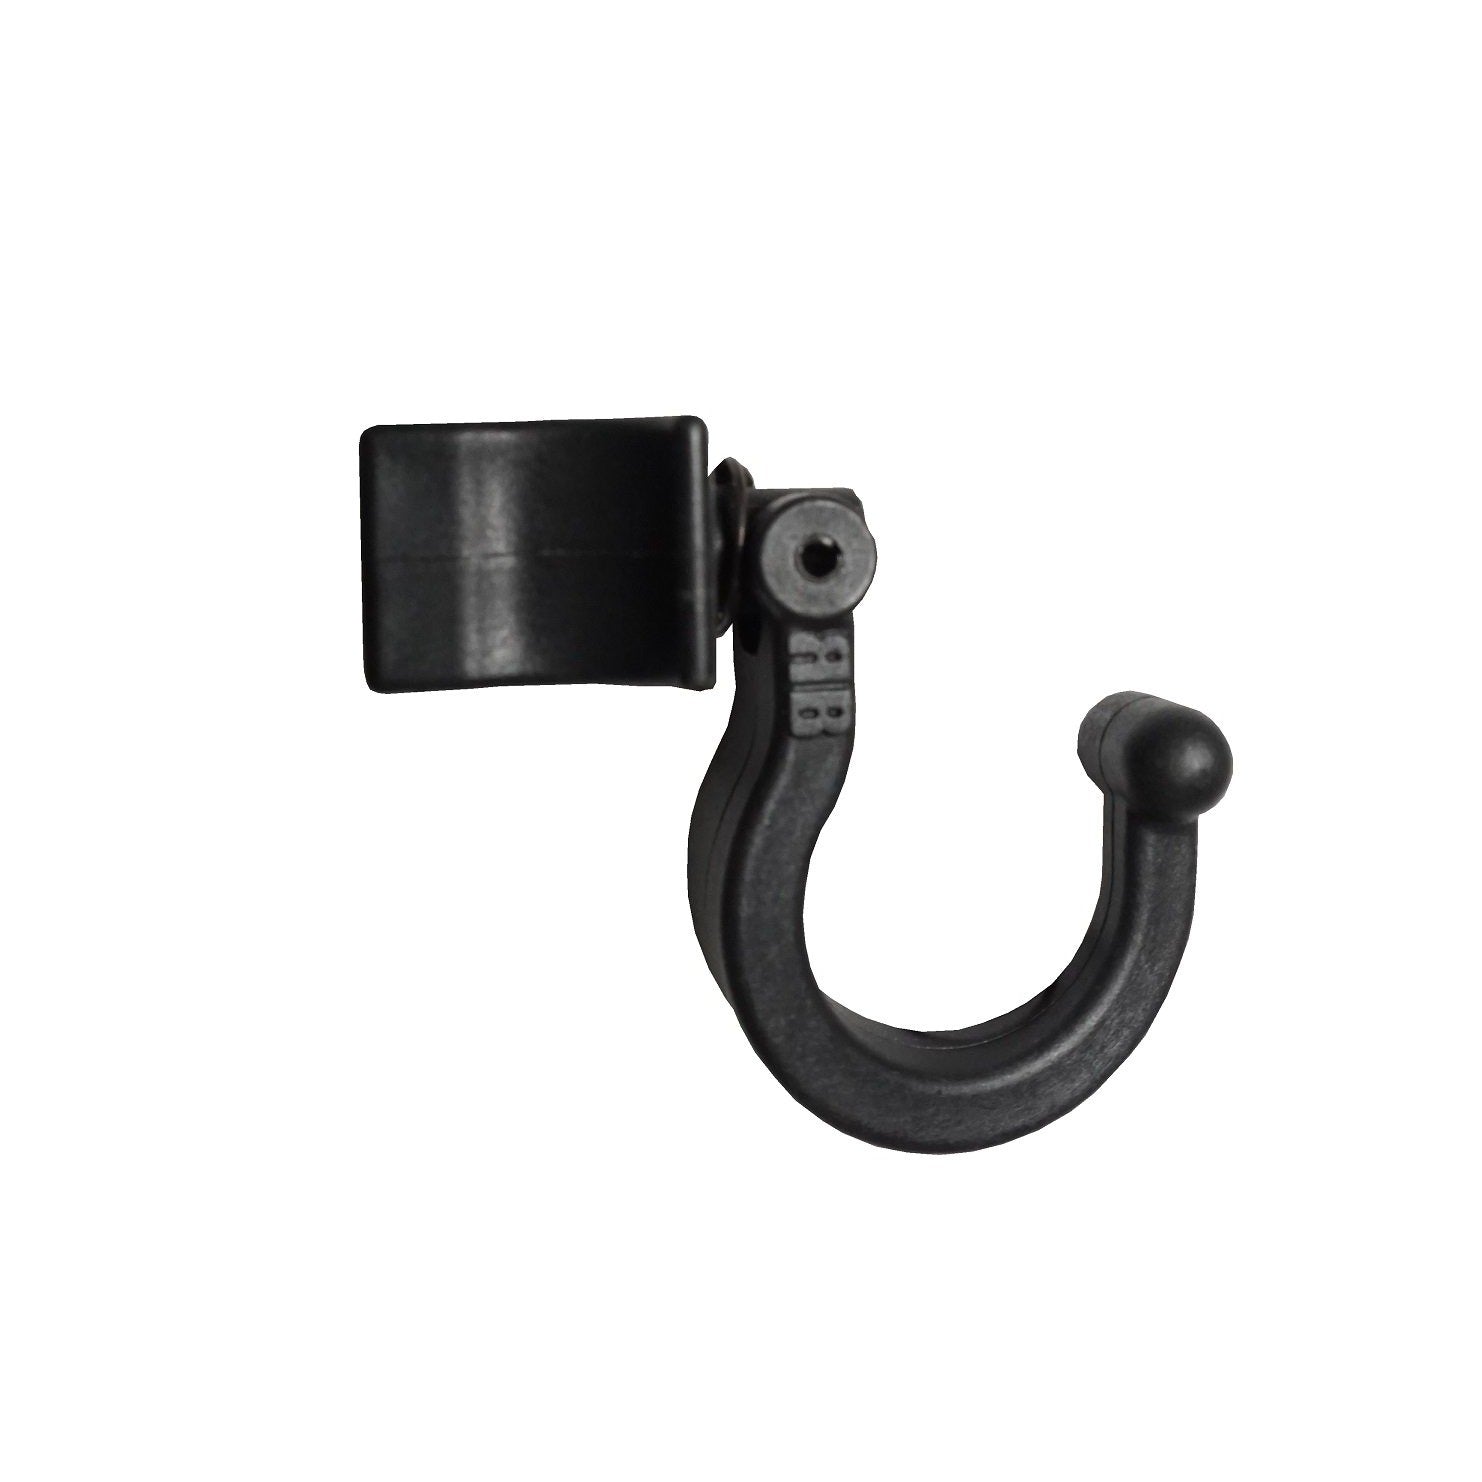 Tie Down Hooks: Large Inventory Tie Down & Cargo Control Hooks